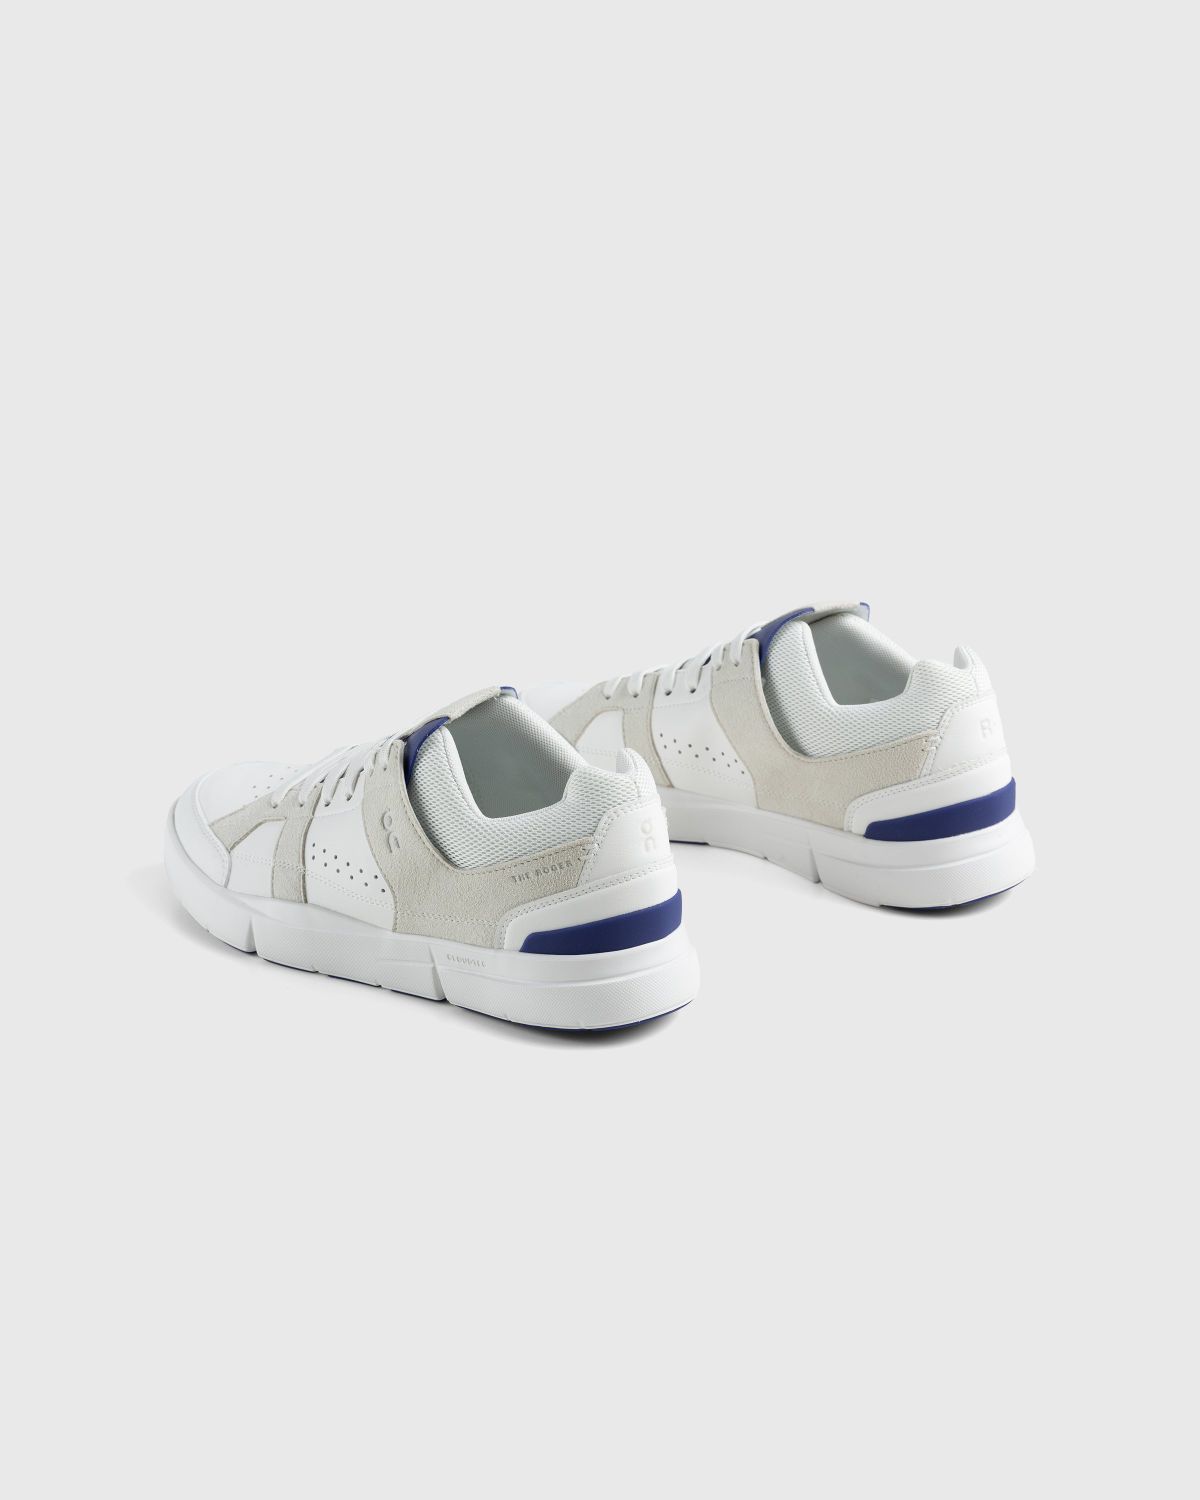 On – THE ROGER Clubhouse White/Indigo - Low Top Sneakers - White - Image 4